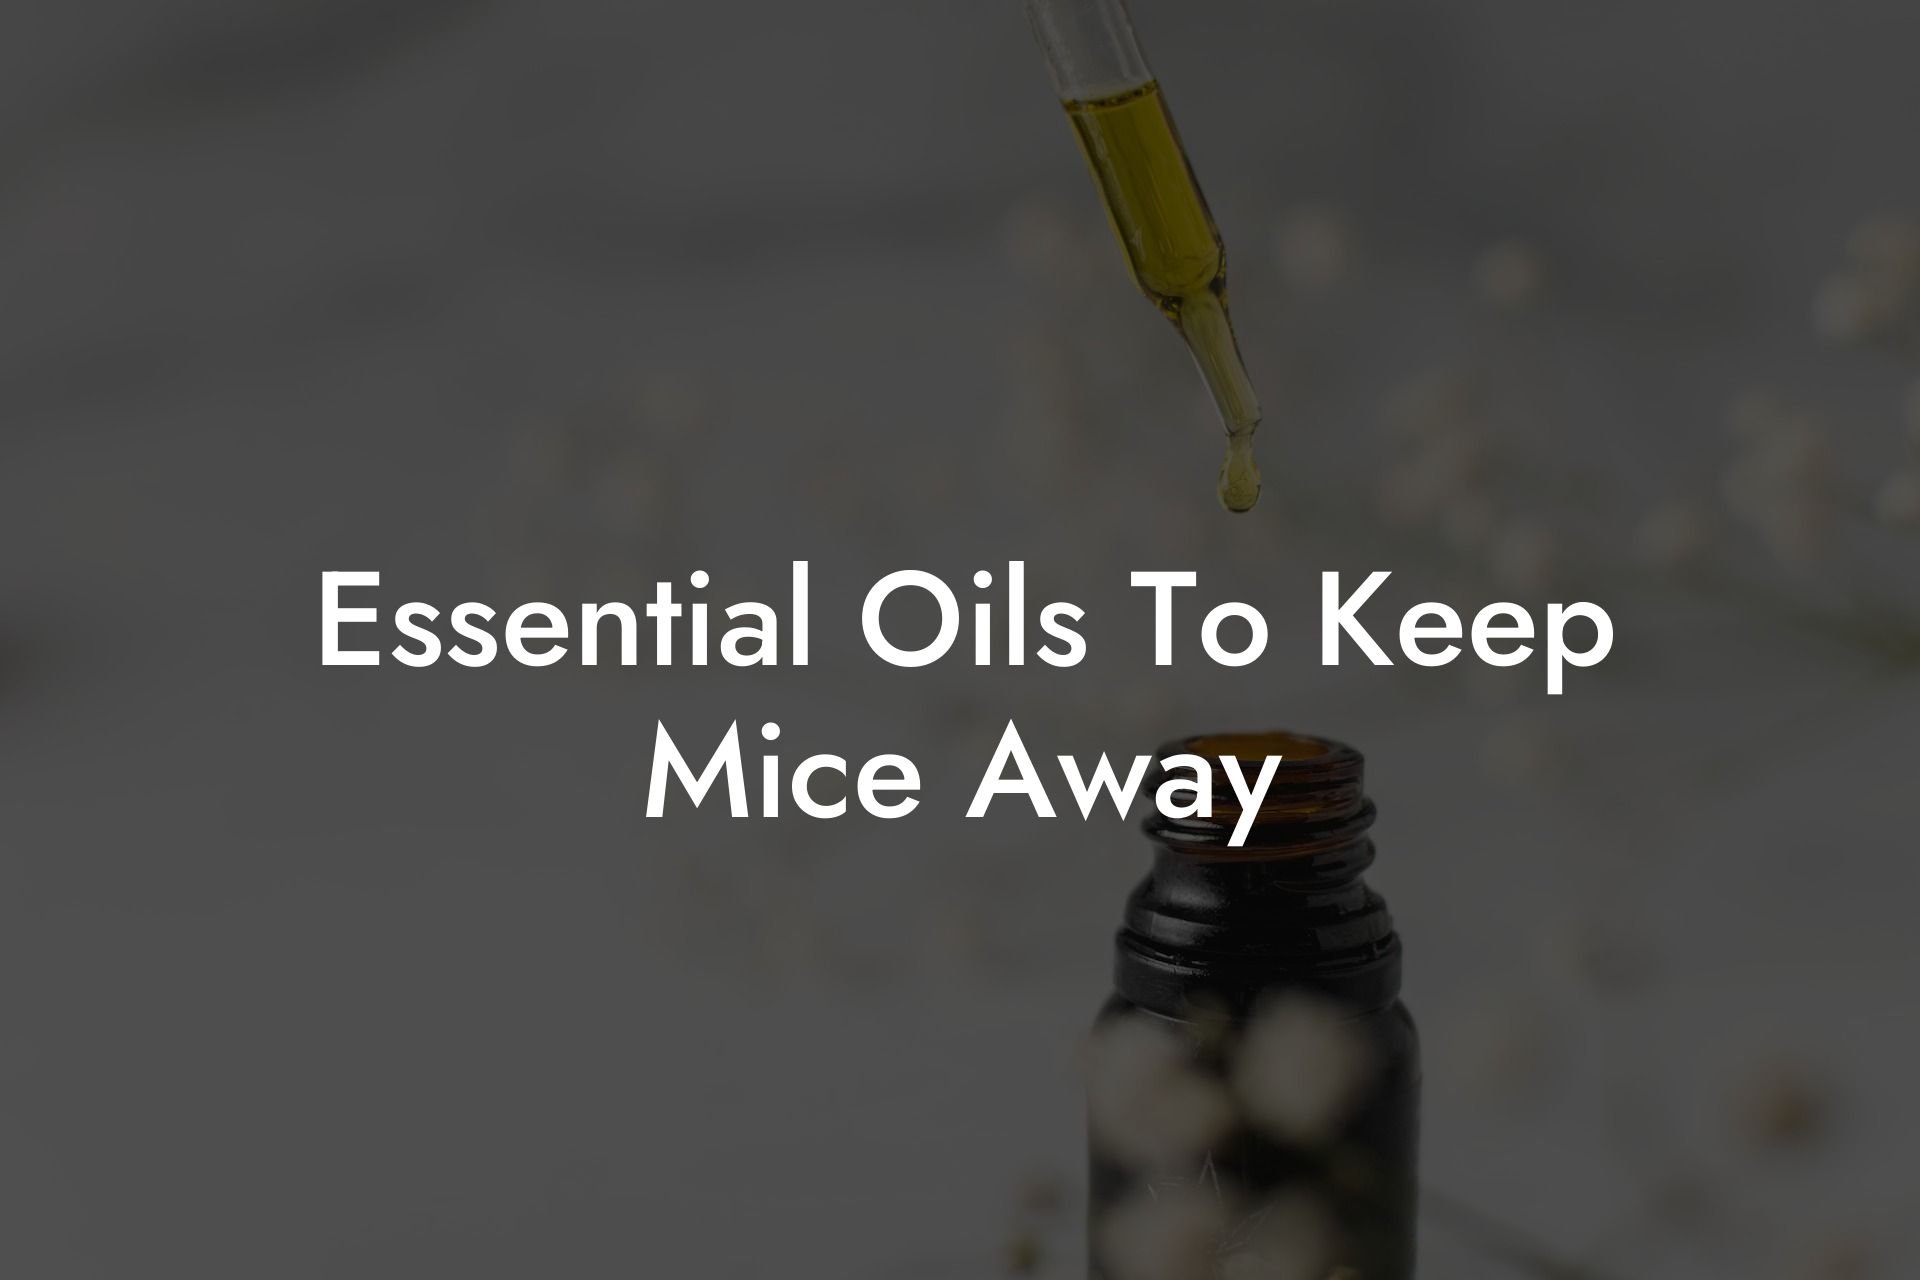 Essential Oils To Keep Mice Away